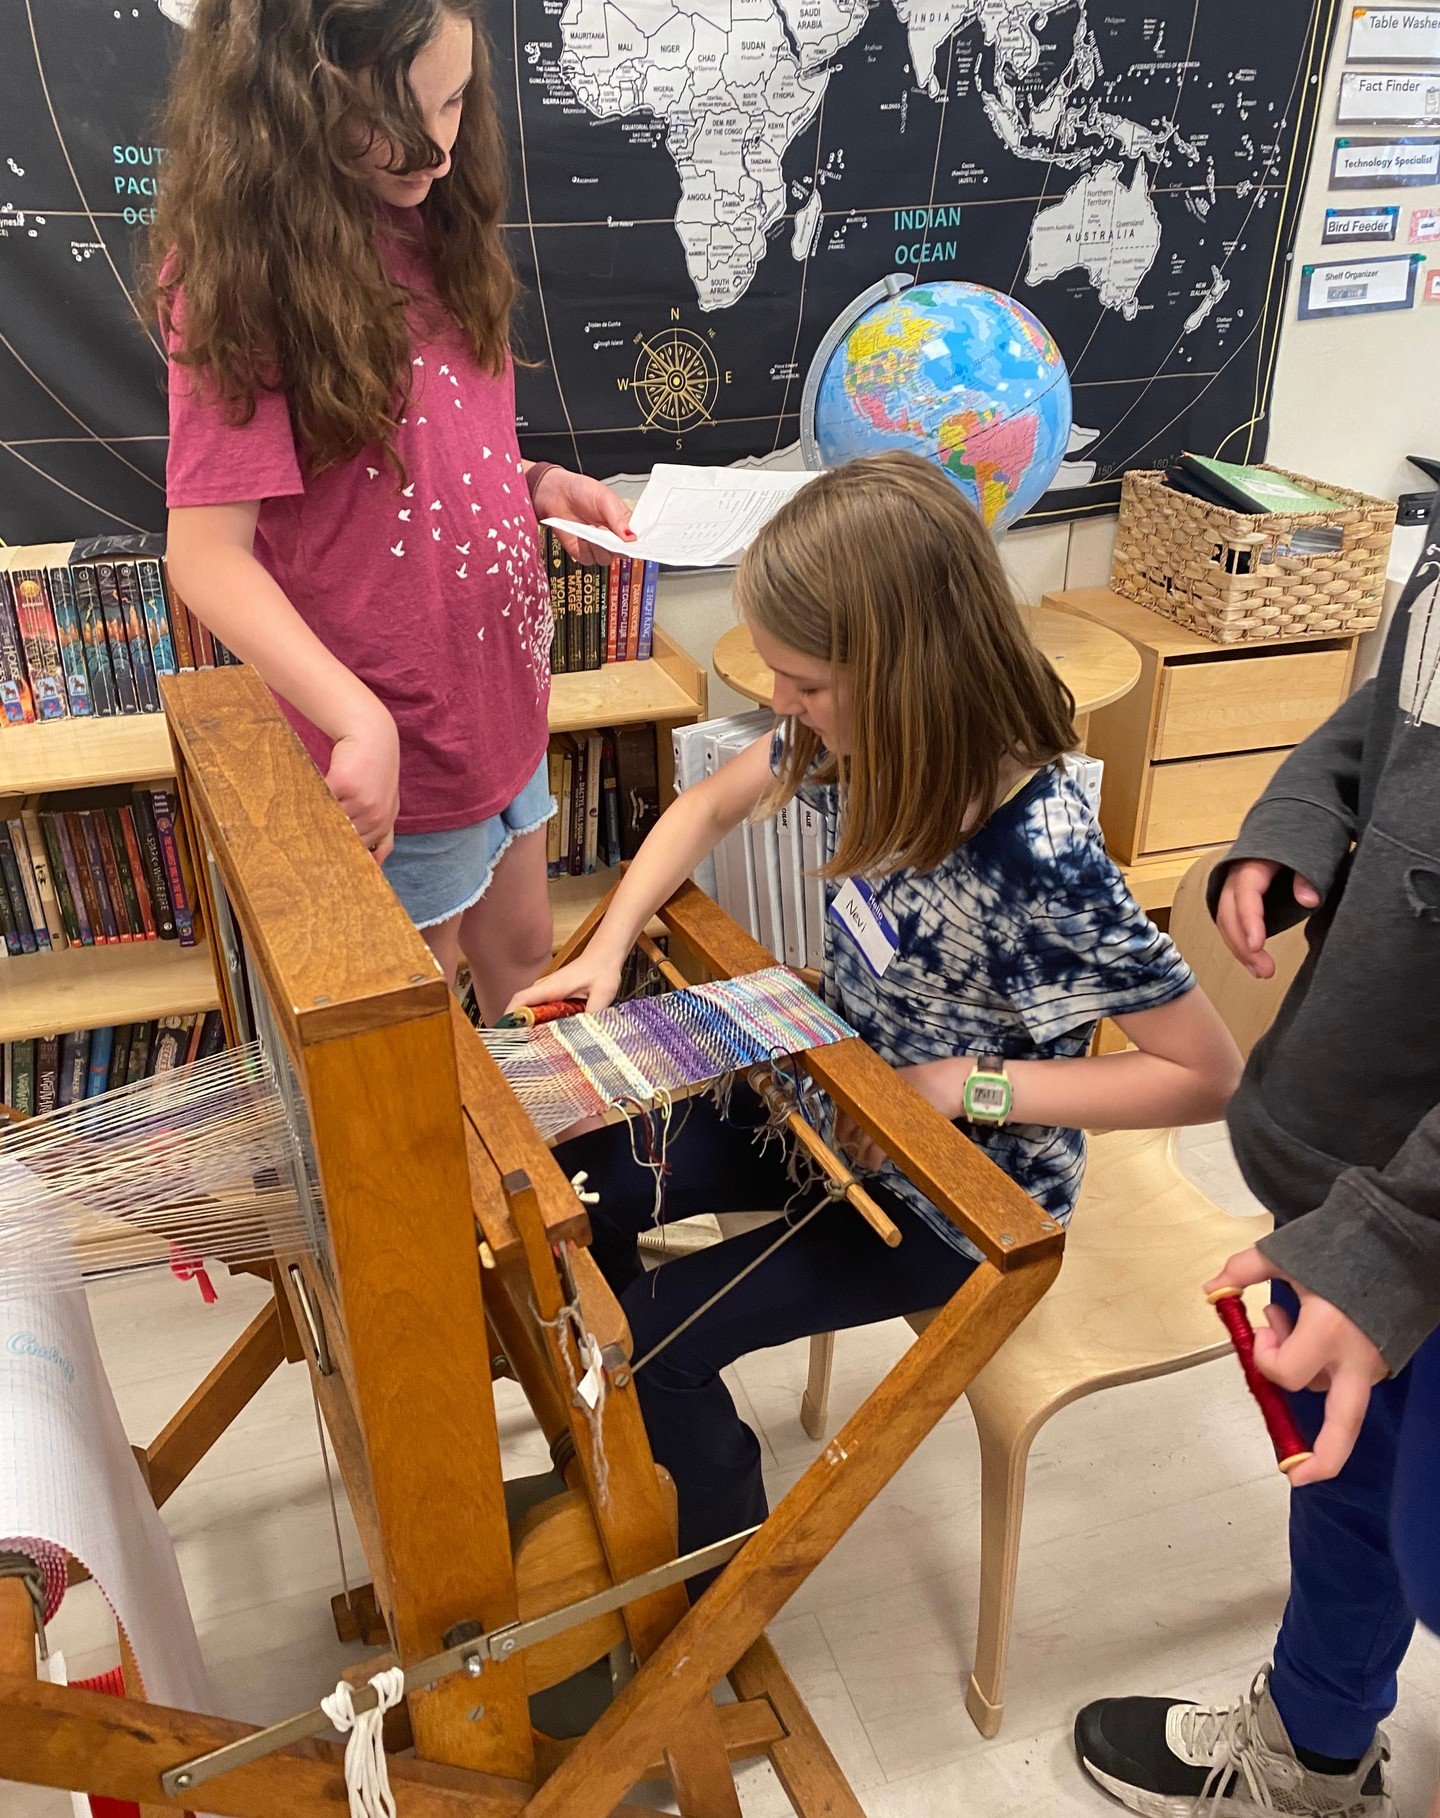 The 4-5 class launched their study of the Industrial Revolution with a workshop led by fiber artist Krysten Morganti. Students learned how to use the spinning wheel to make their own yarn and wove collaborative pieces on three different looms. What a